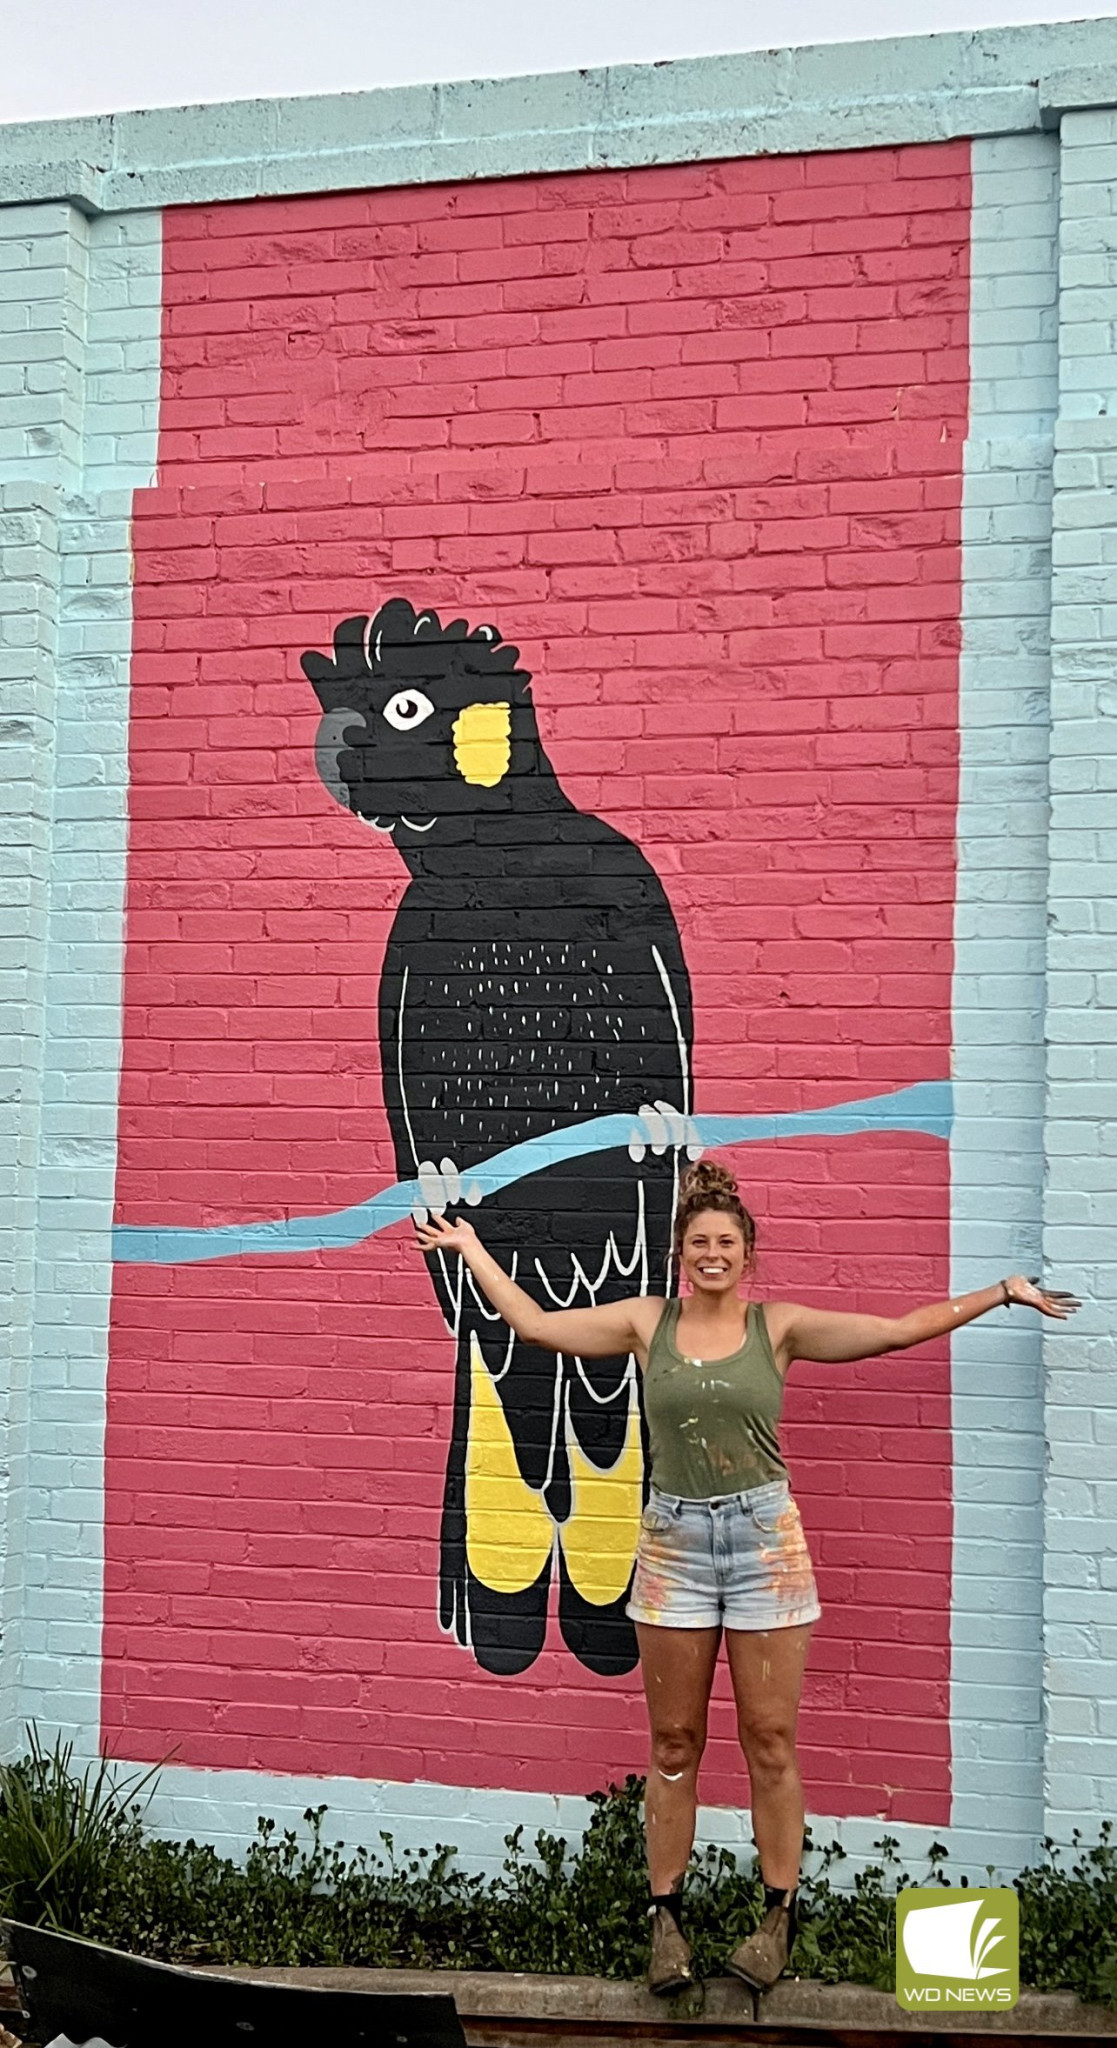 Eye catching piece: Timboon artist Katherine Fox has completed a mural in Timboon which will form part of a new initiative.